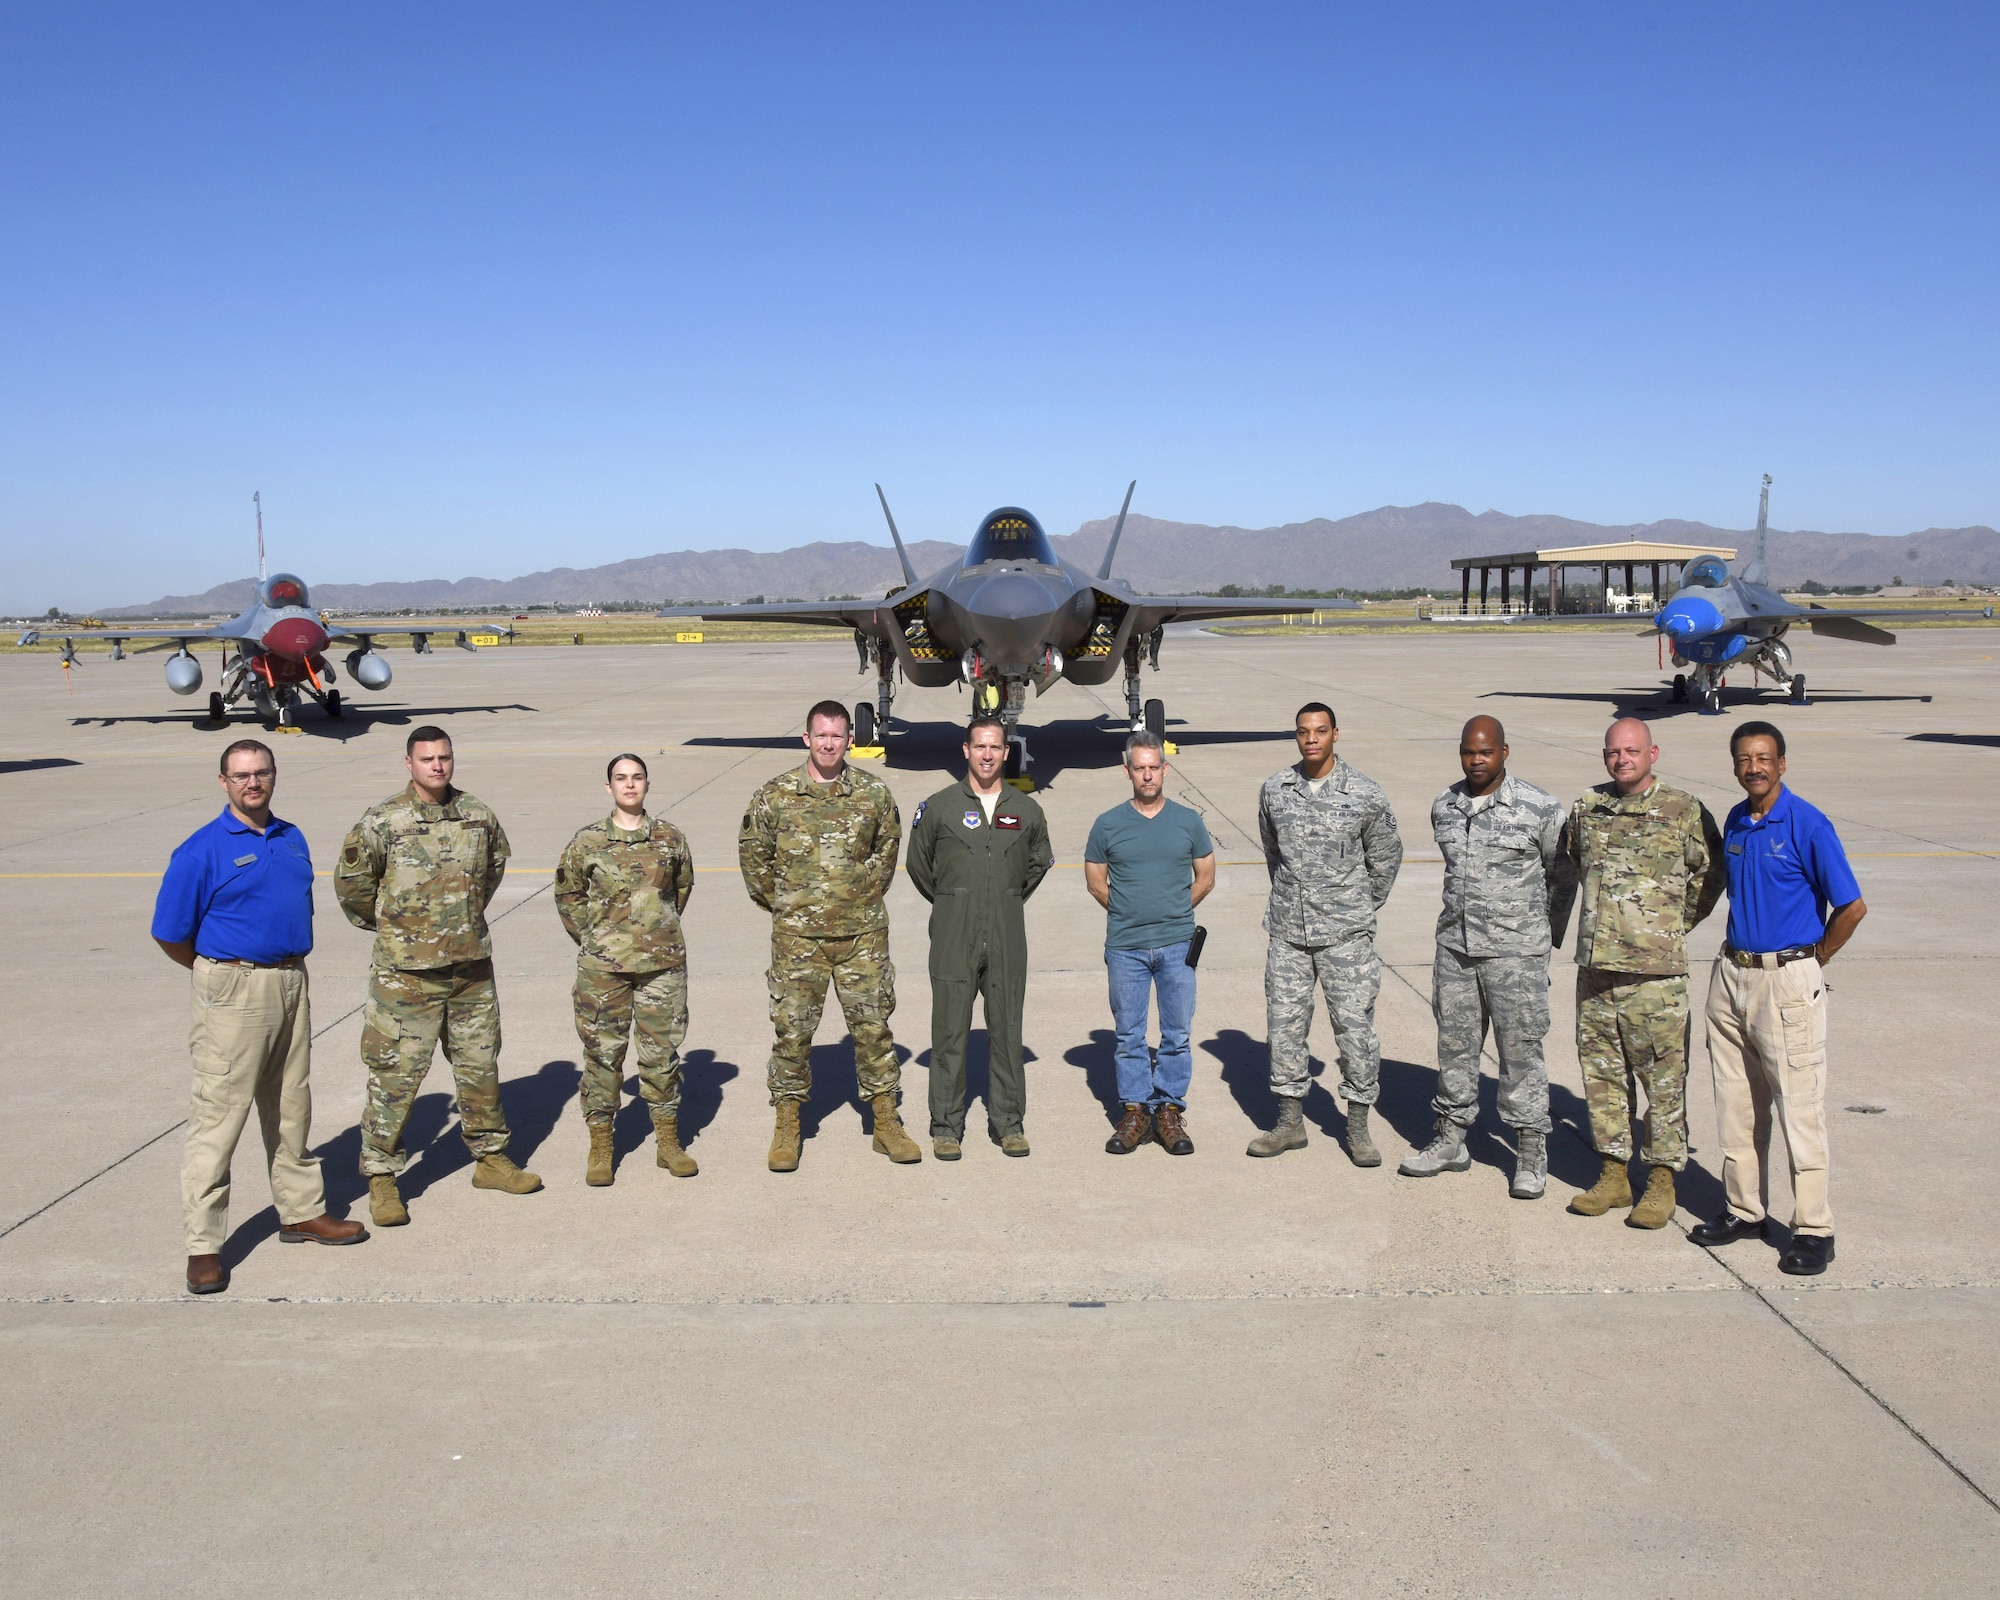 Members of the 56th Fighter Wing Safety Office stand for a group photo on the runway with a F-35A Lightning II and a F-16 Fighting Falcon, May 30, 2019, at Luke Air Force Base, Ariz. The Safety Office is comprised of three different sections; weapons, flight and occupational, these sections work together to ensure the safety of the Airmen and the base. (U.S. Air Force photo by Airman Brooke Moeder)